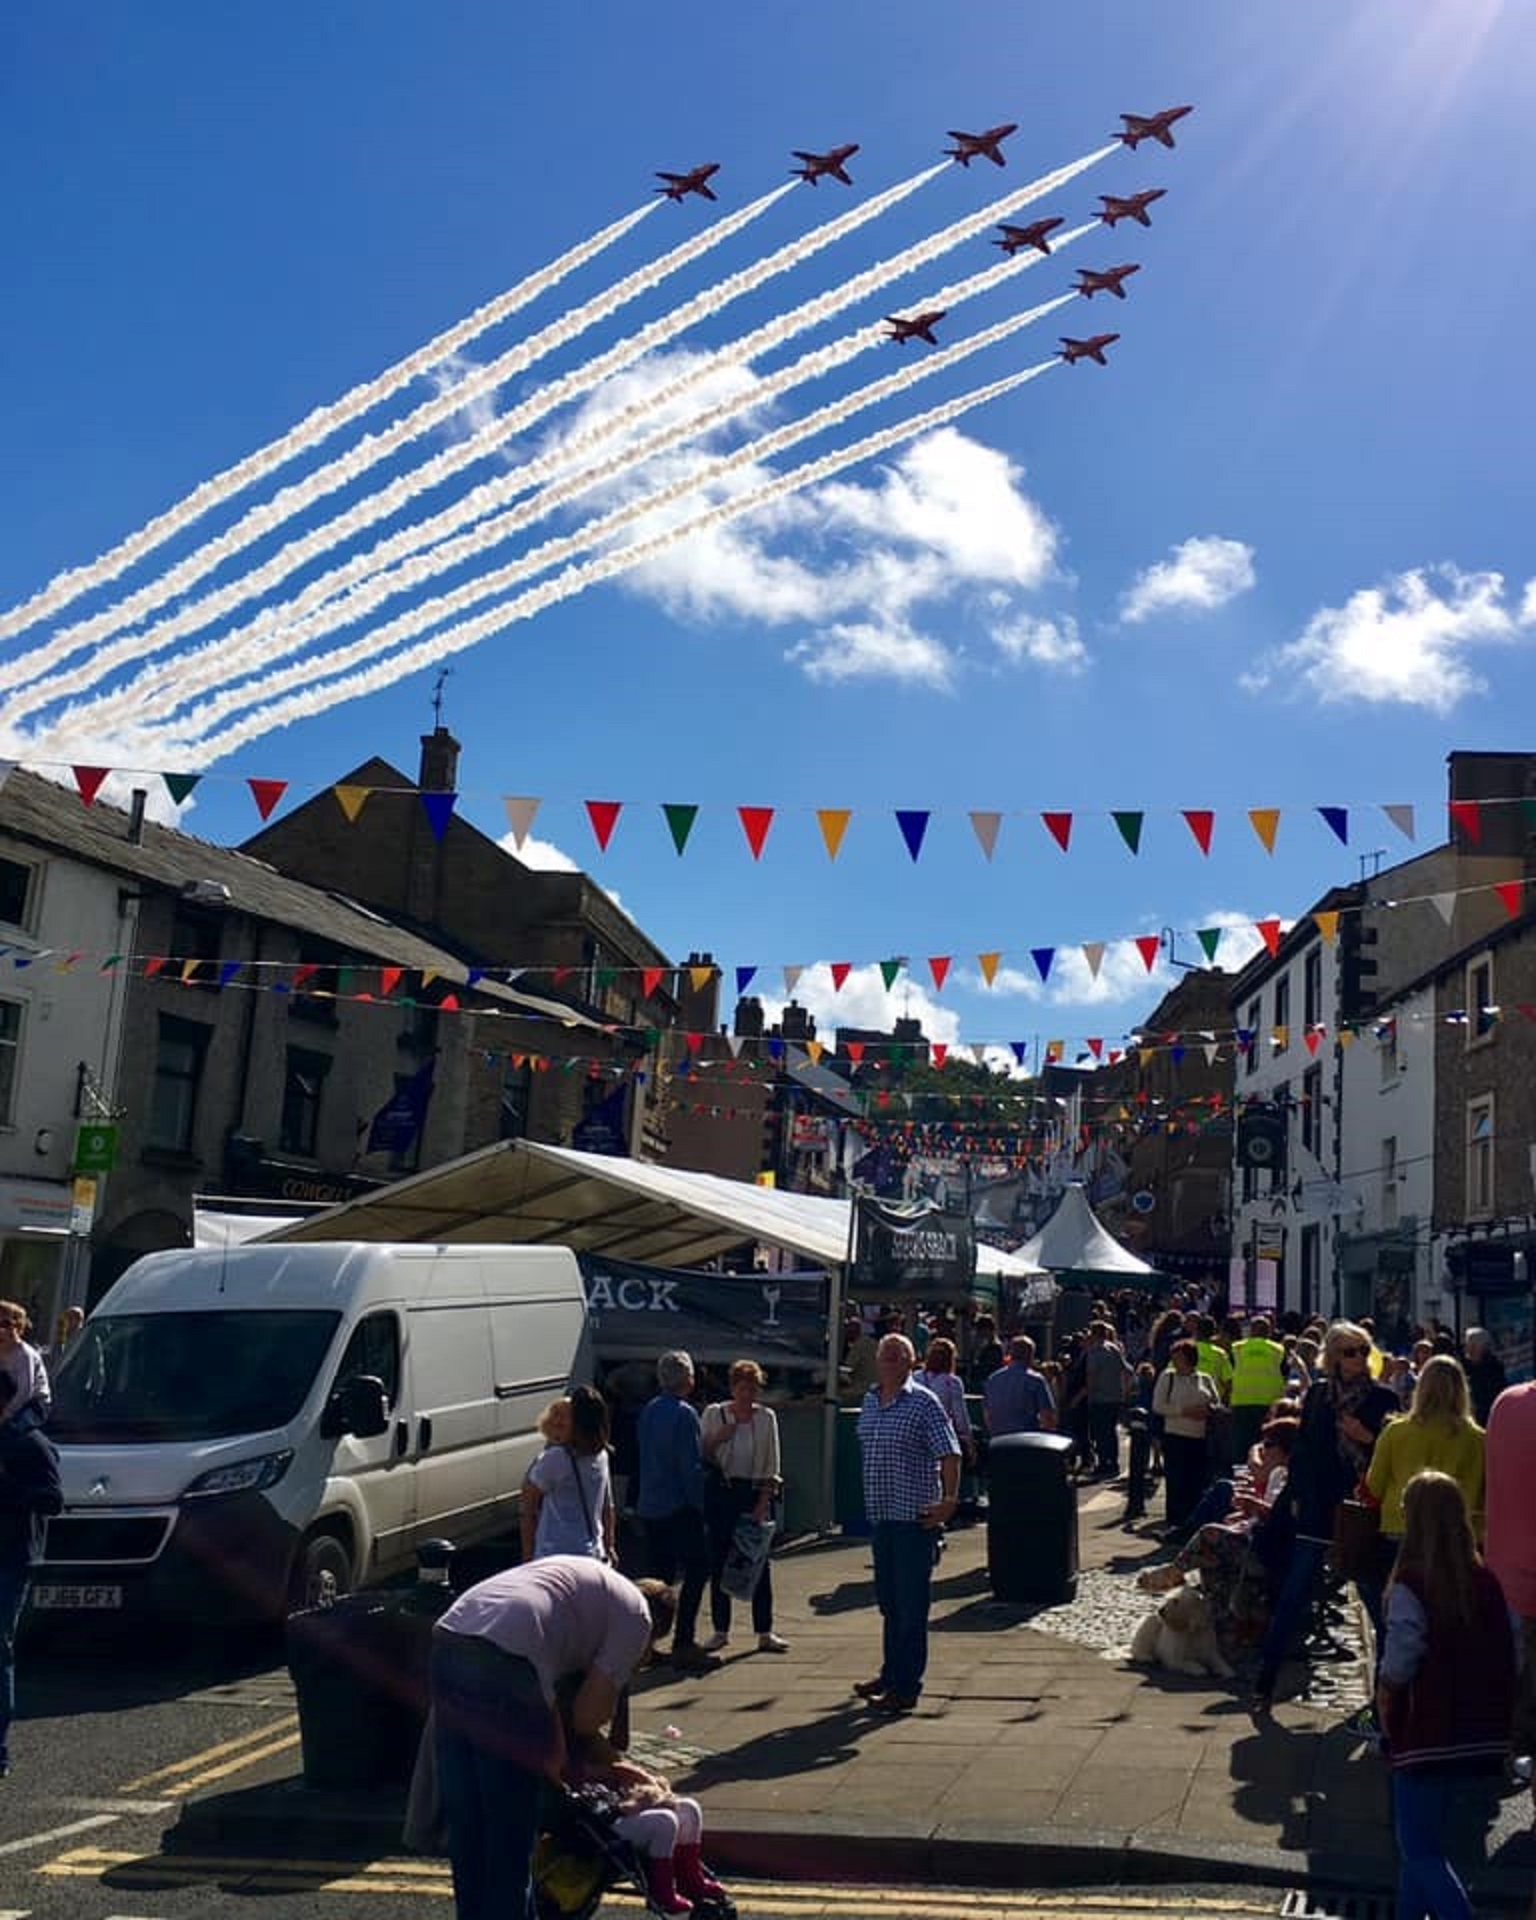 A fly-over by the Red Arrows is on the menu at the Clitheroe Food Festival on Saturday.